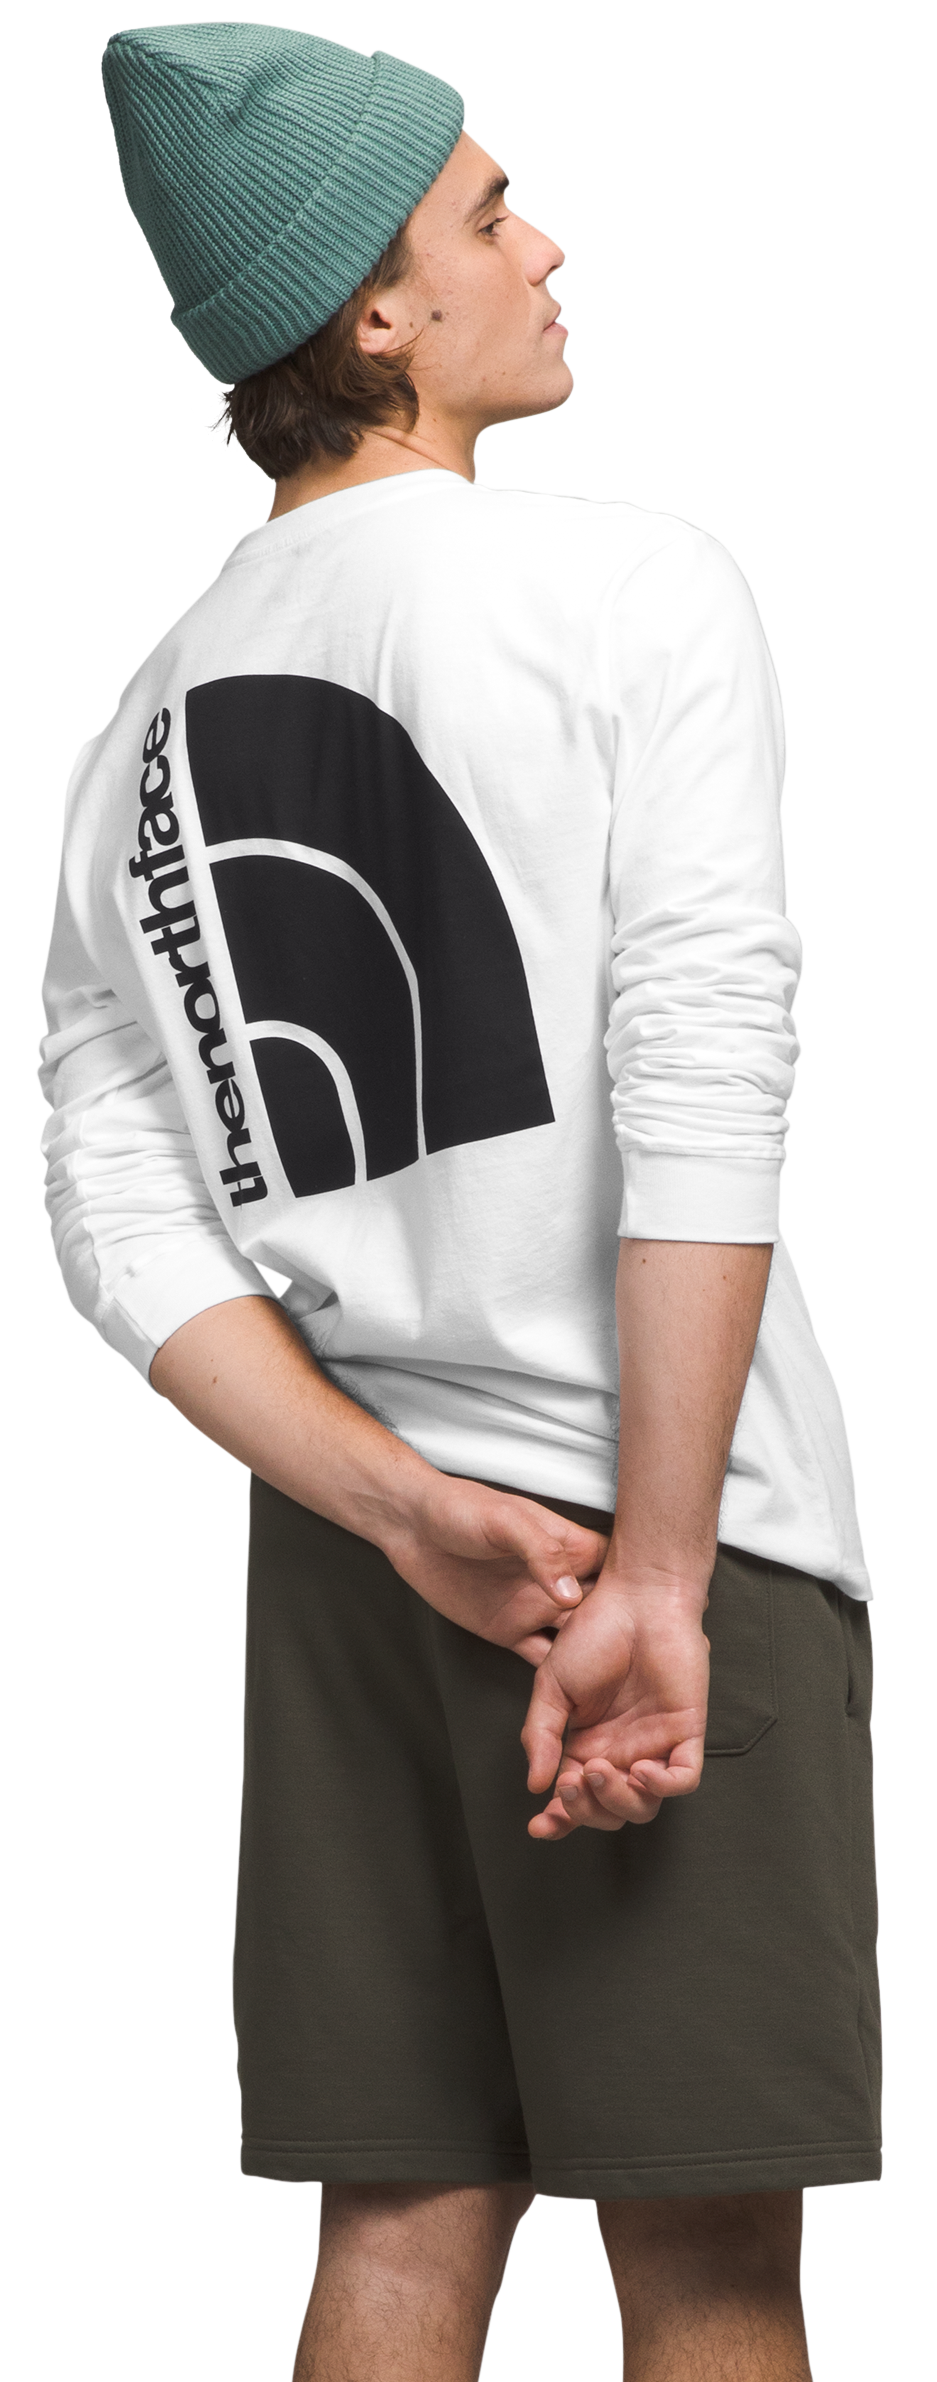 The North Face Jumbo Half Dome Long-Sleeve T-Shirt for Men